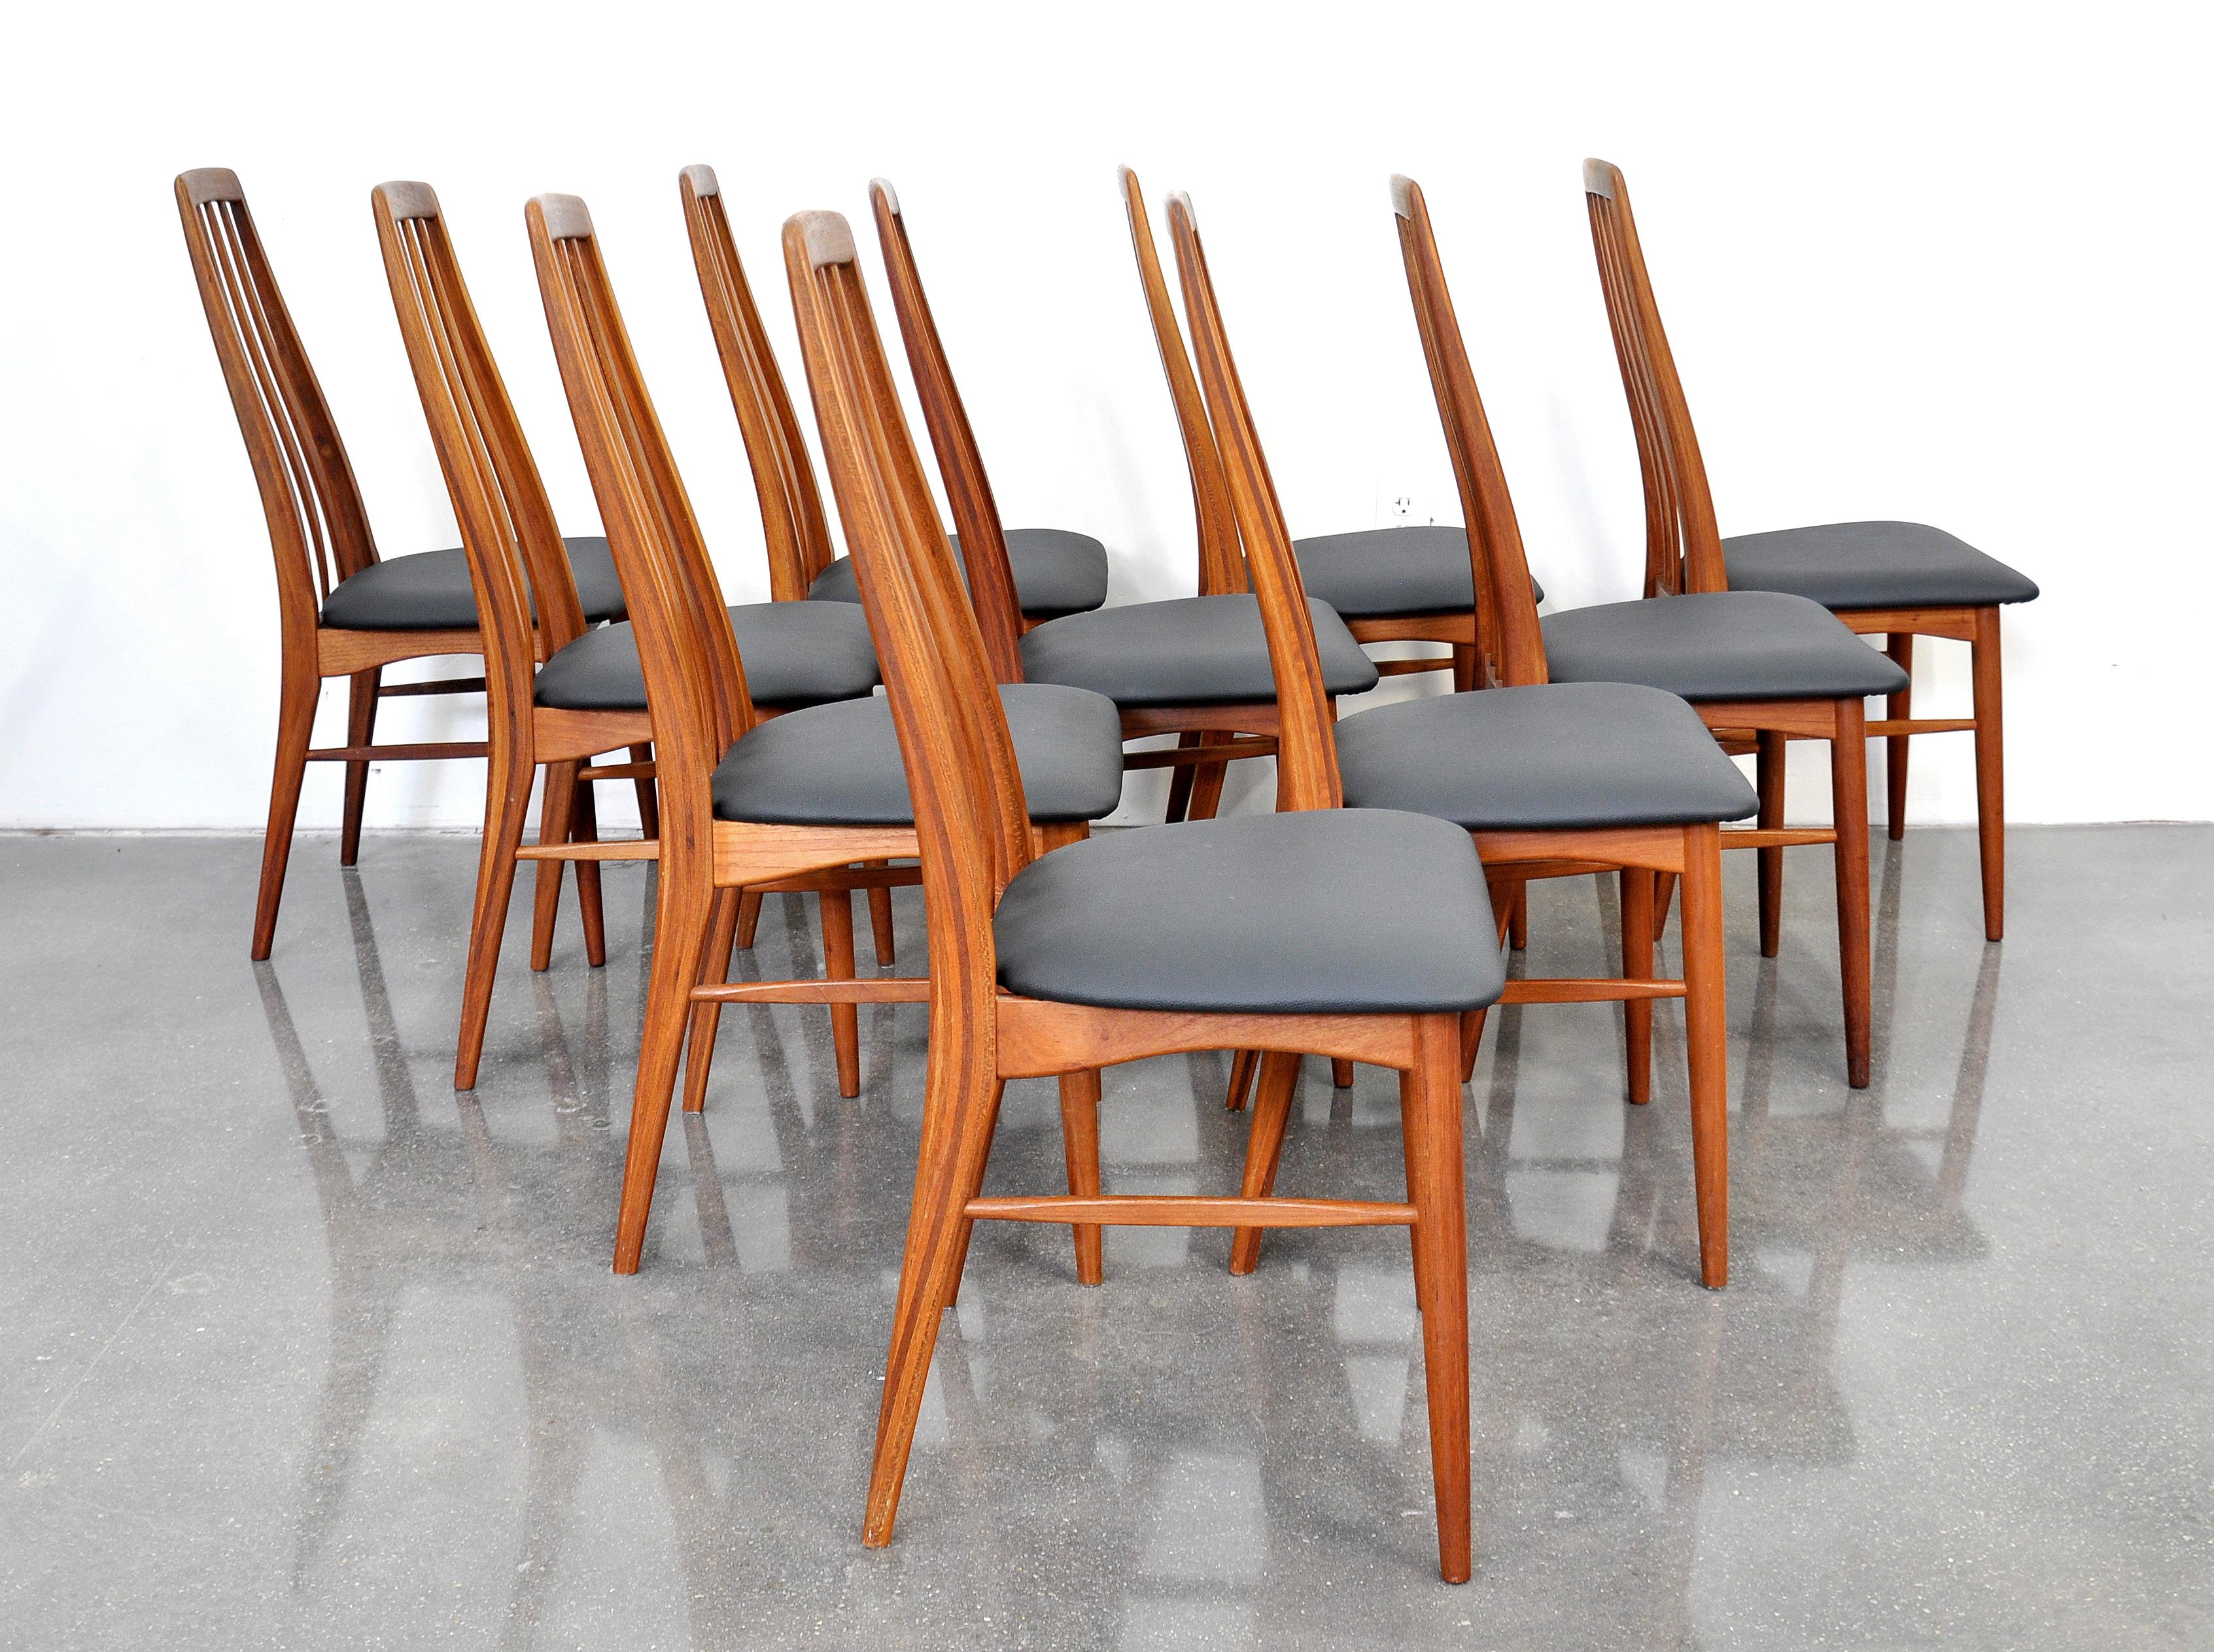 Set of ten Mid-Century Danish Modern dining chairs designed by Niels Koefoed, manufactured by Koefoeds Mobelfabrik and dating from the late 1960s. The sculpted solid teak frames are in original condition with great patina. They feature tapering